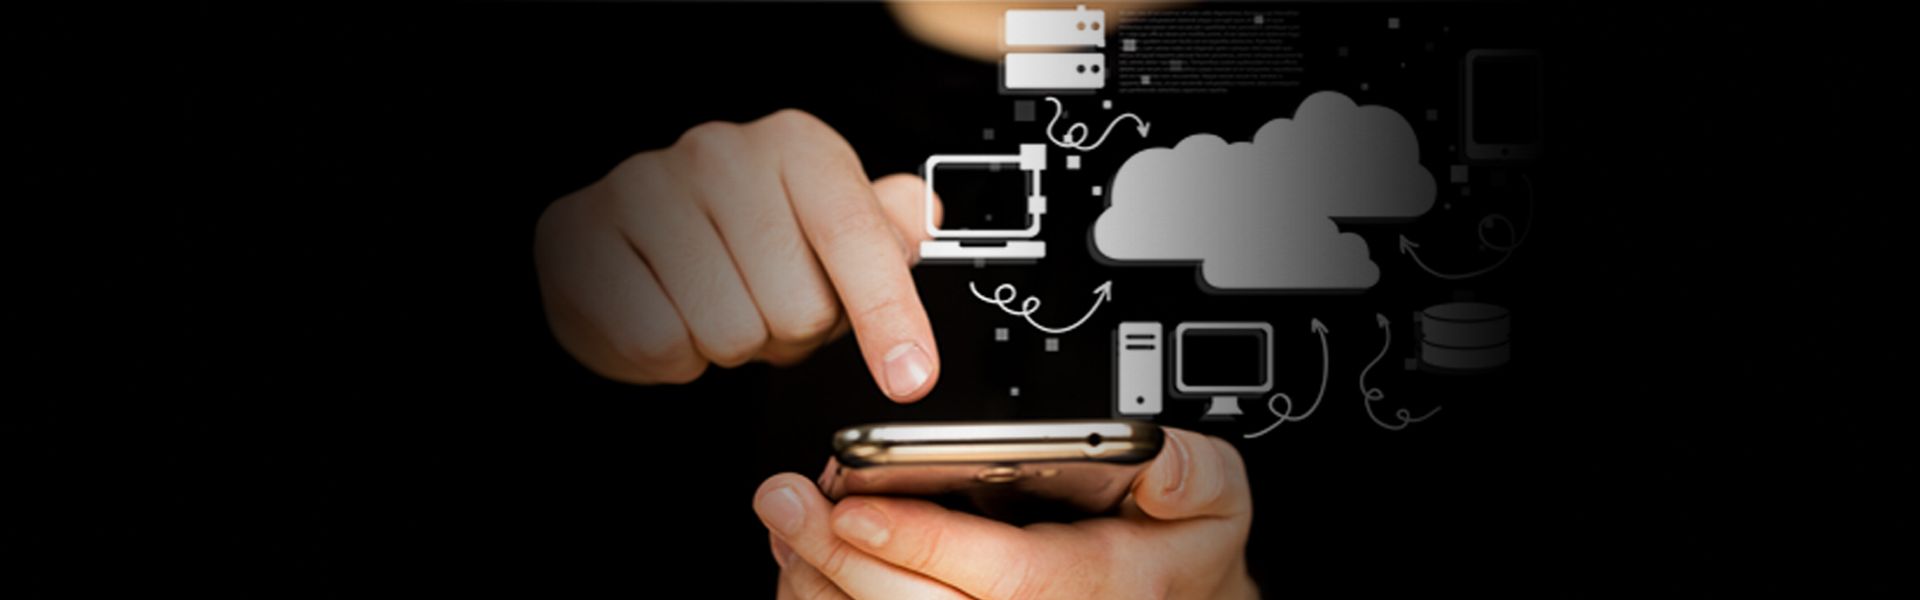 How-to-Accelerate-Mobile-Application-Testing-in-the-Cloud